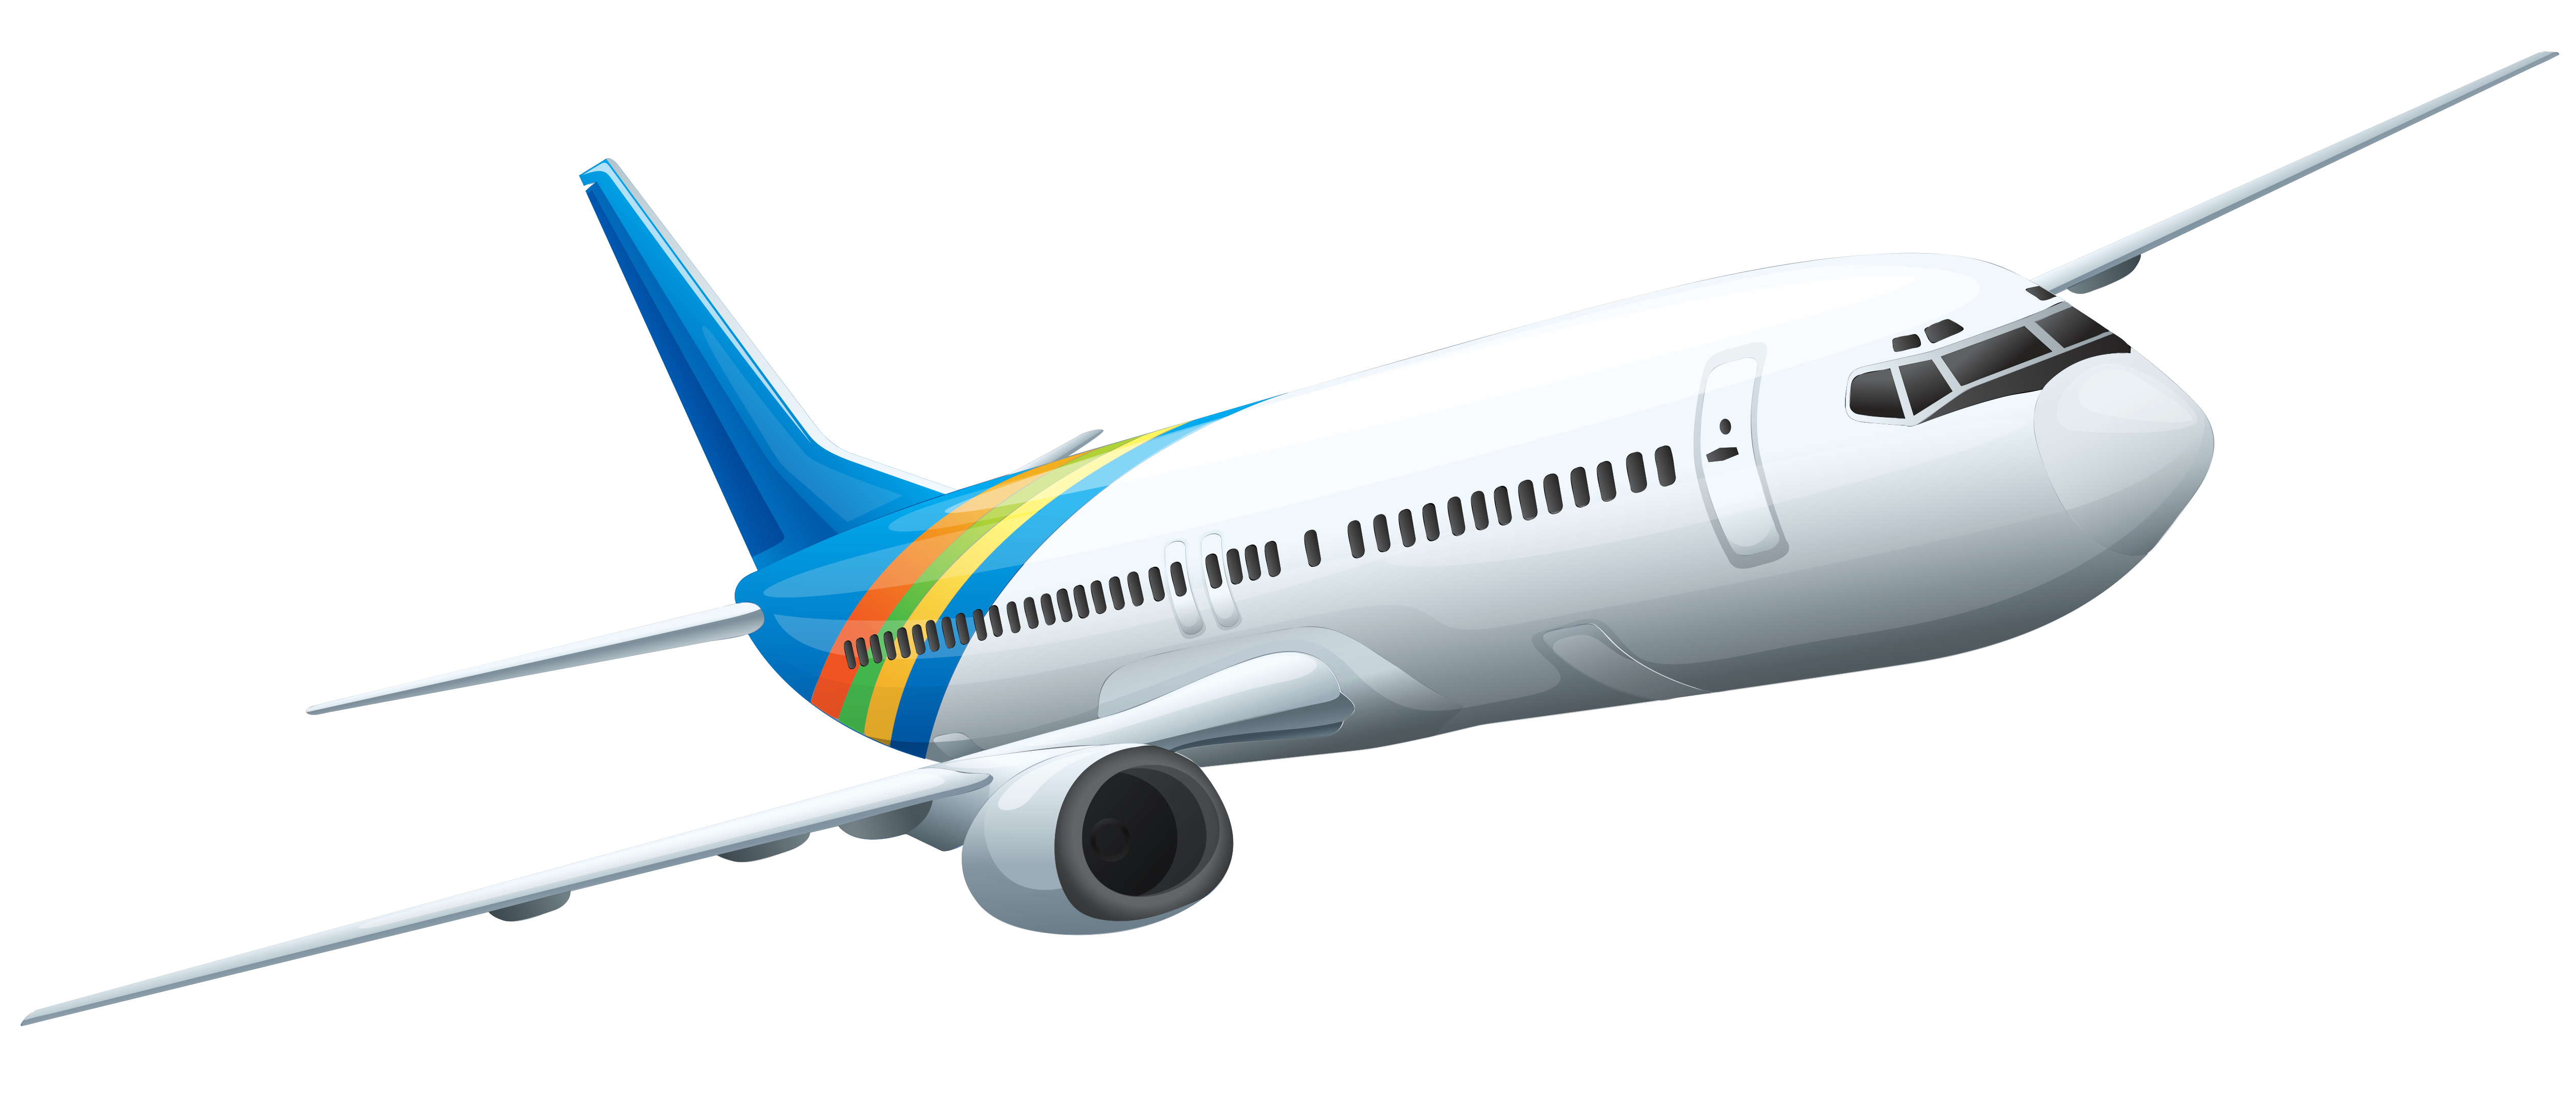 Image PNG GRATUITE AIRPLANE